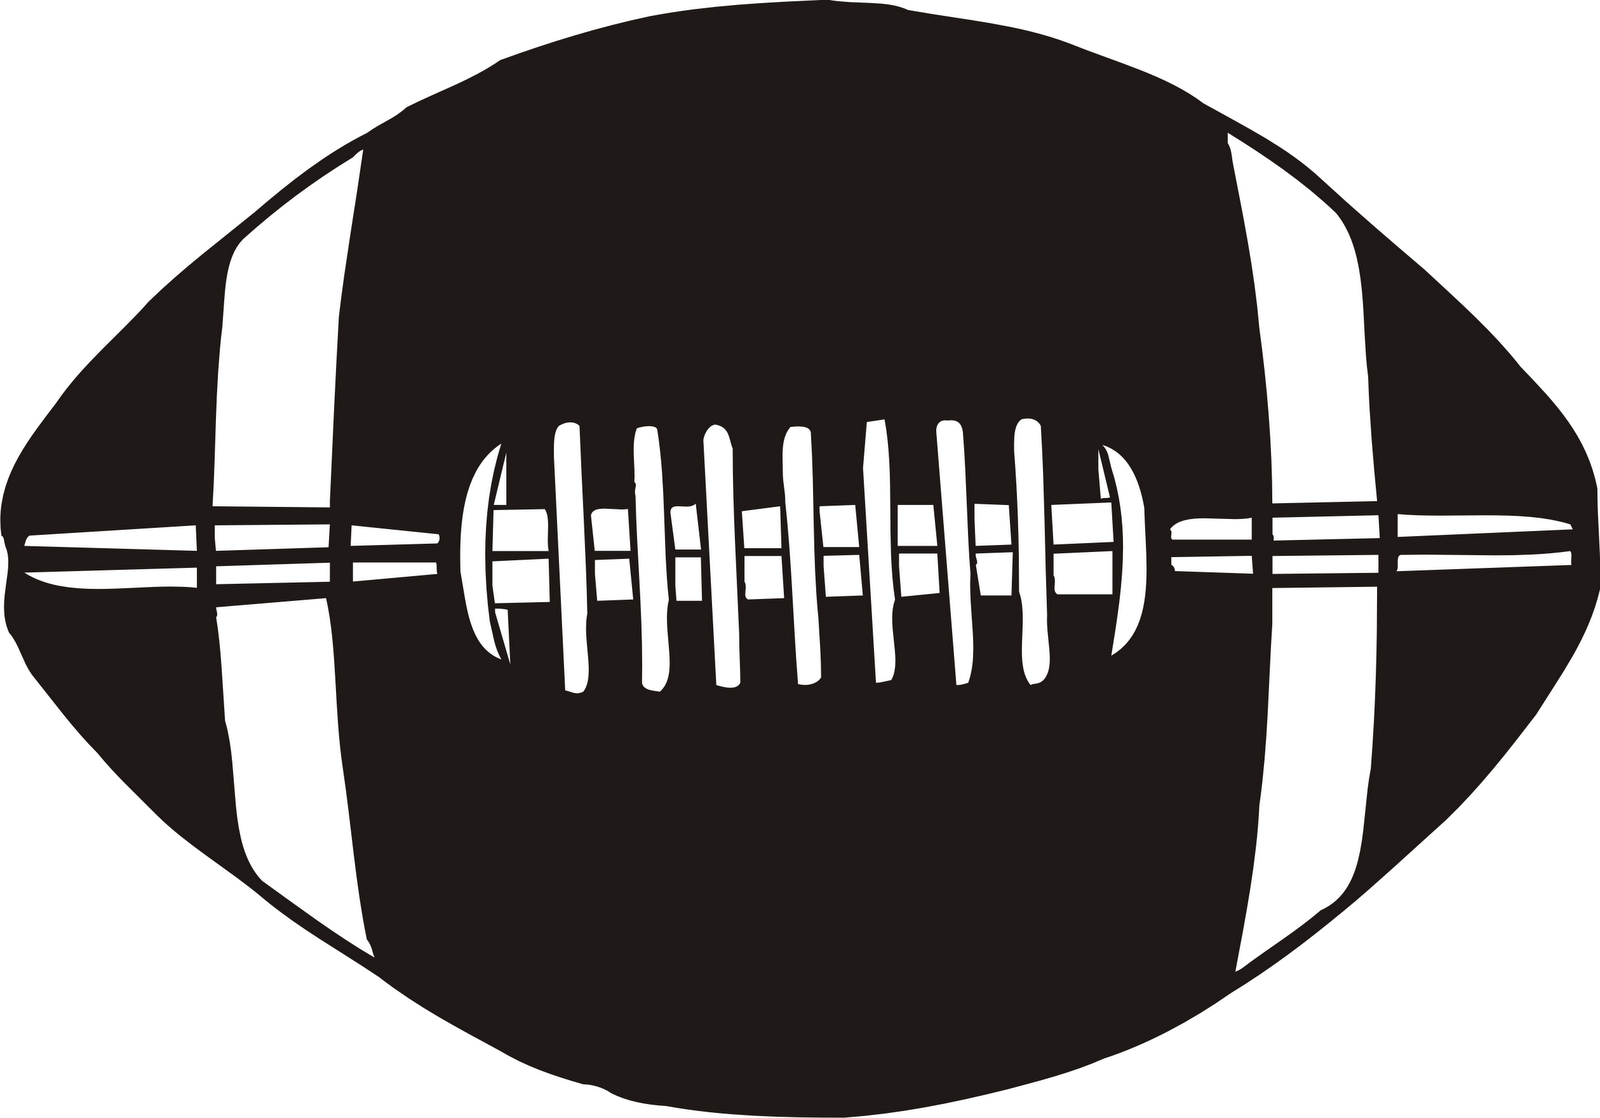 Football clipart free clip art images image 7